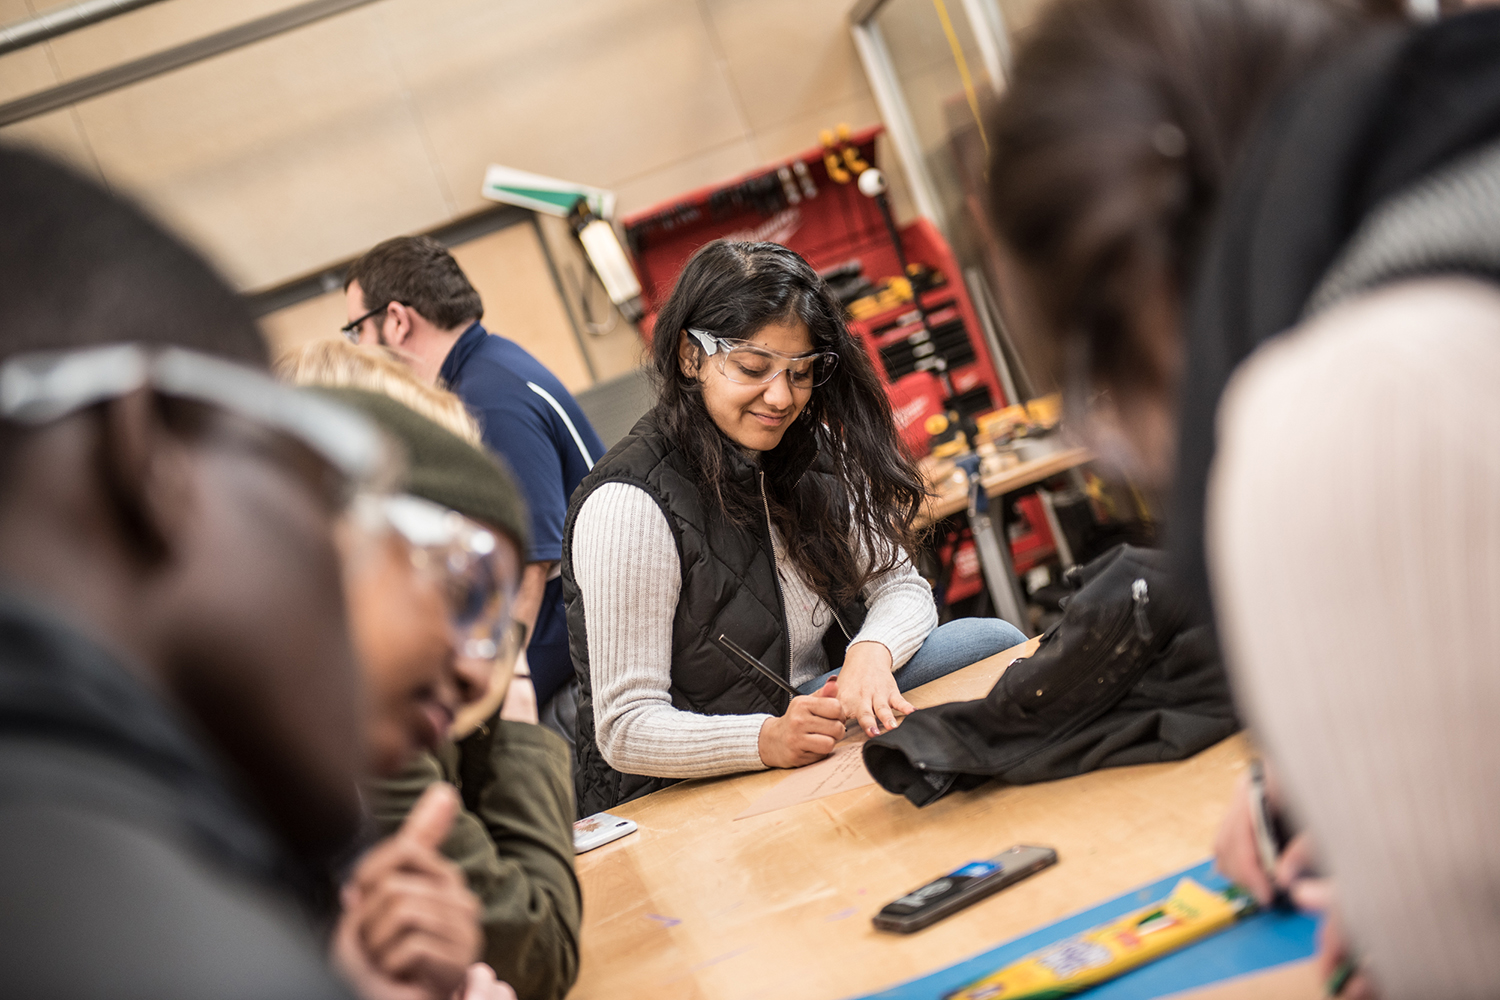 Students from eight universities, two of them international, participated in an ice-breaker at the Makerspace experimental lab at the Werth Tower, as a prelude to the Annual UConn CIBER Case Challenge. (Nathan Oldham/UConn School of Business)